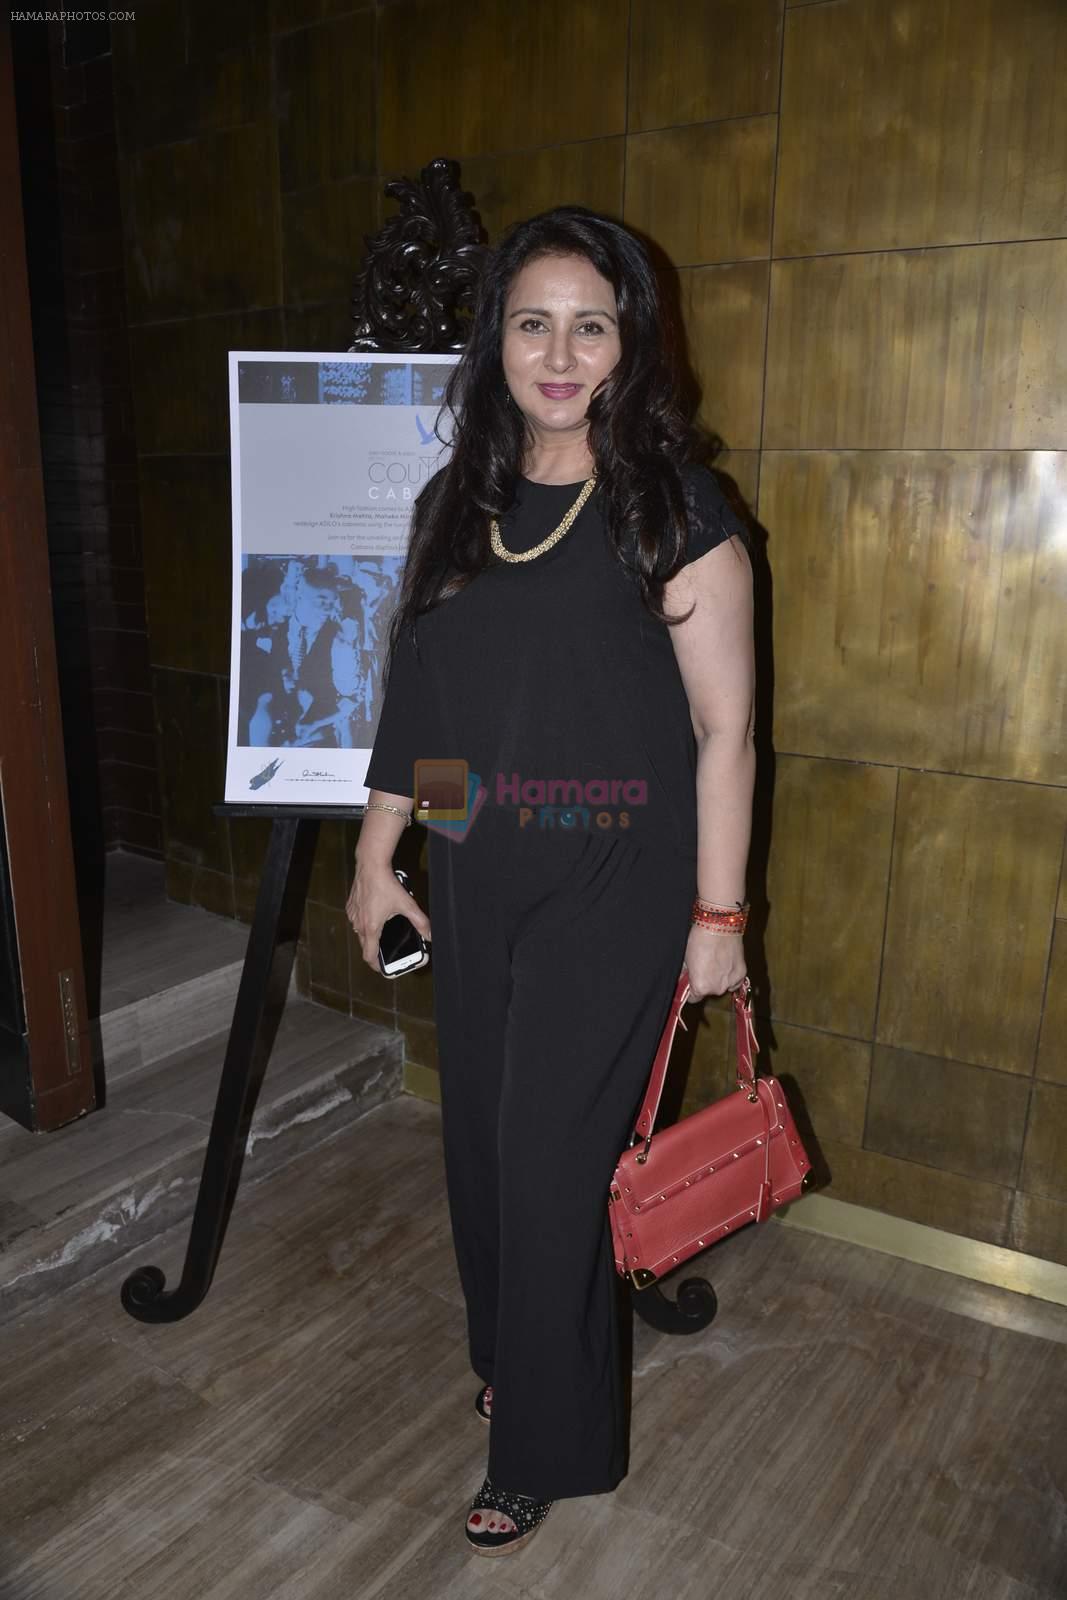 Poonam Dhillon at Couture Cabana hosted at Asilo on 27th Nov 2015